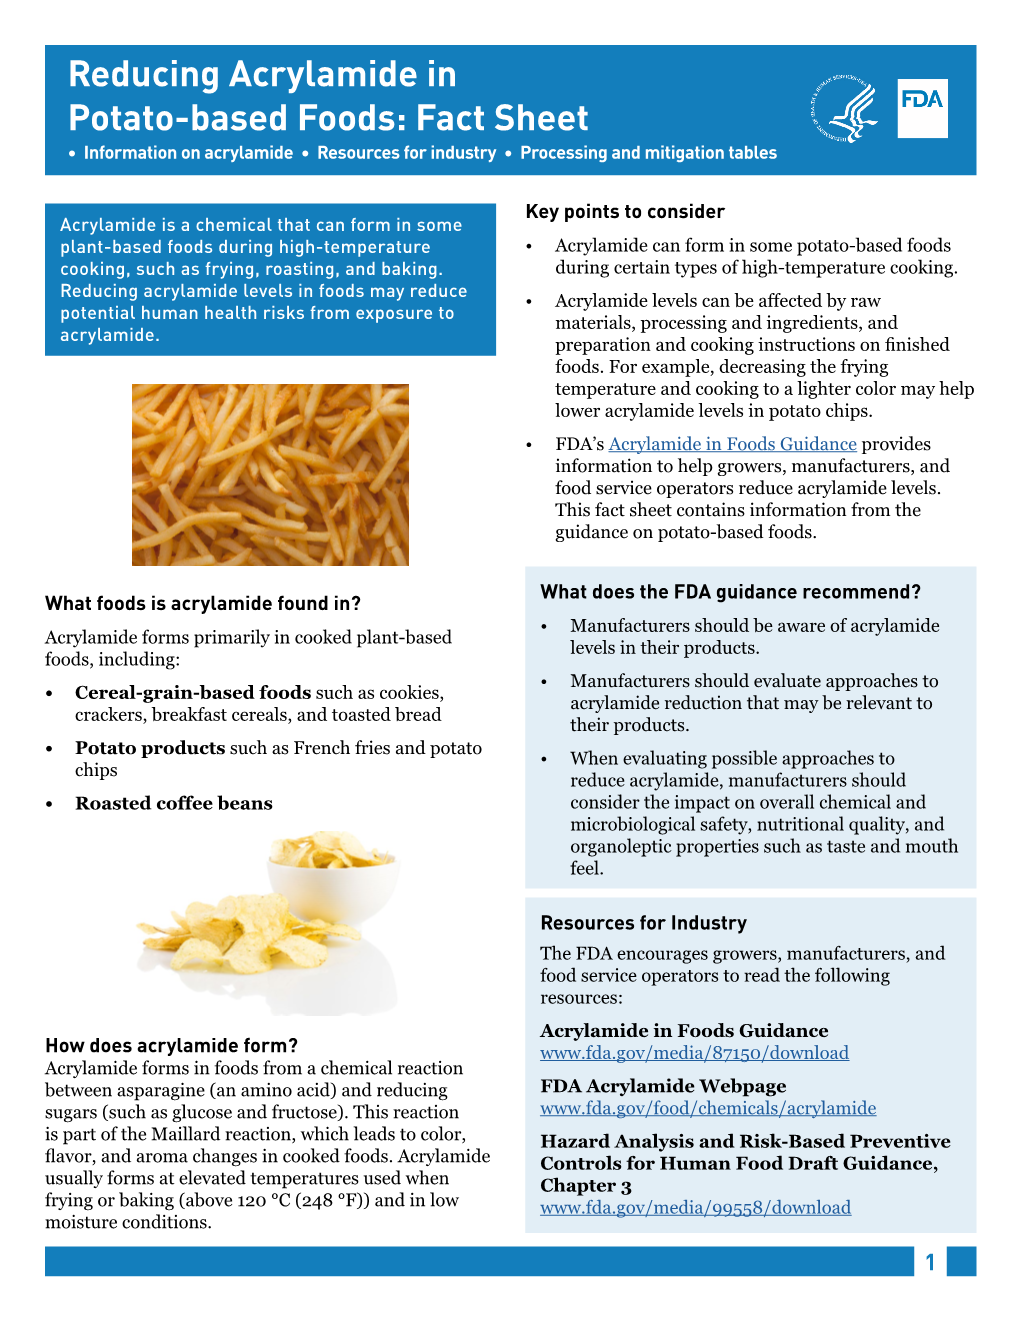 Reducing Acrylamide in Potato-Based Foods: Fact Sheet • Information on Acrylamide • Resources for Industry • Processing and Mitigation Tables